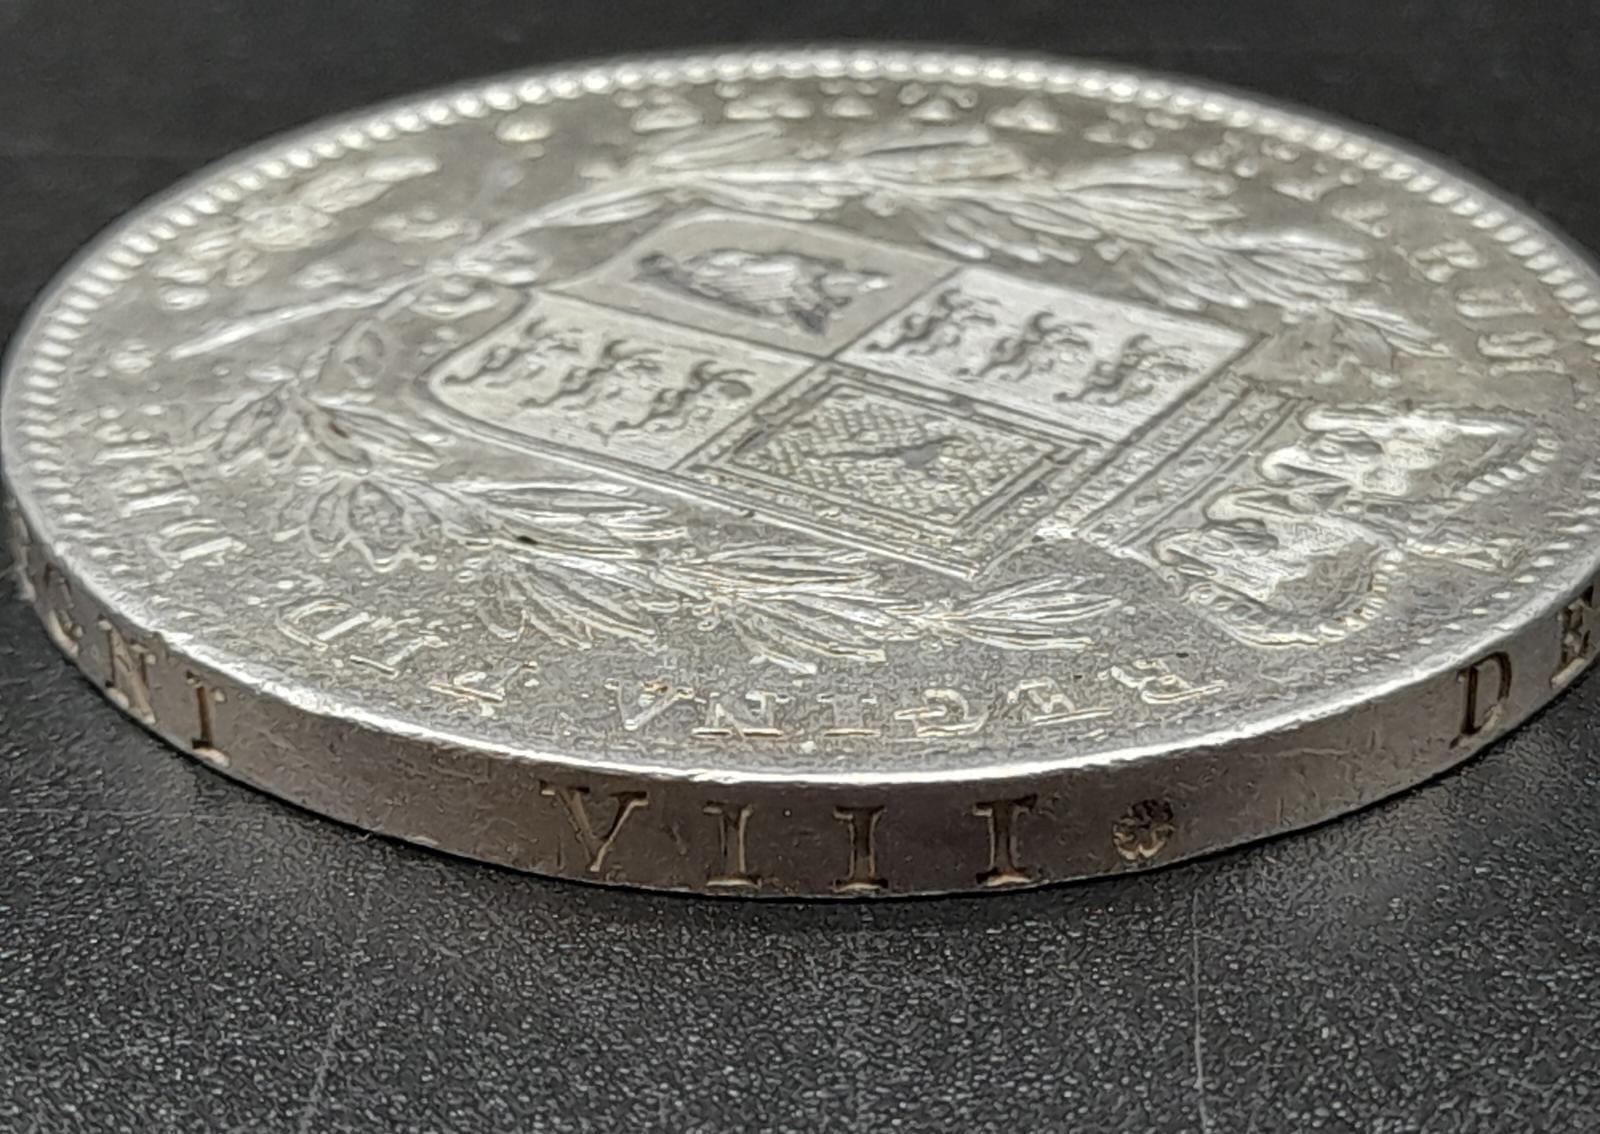 A Queen Victoria 1844 Silver Crown Coin. EF condition but please see photos. 28.3g. Spink - 3882. - Image 7 of 7